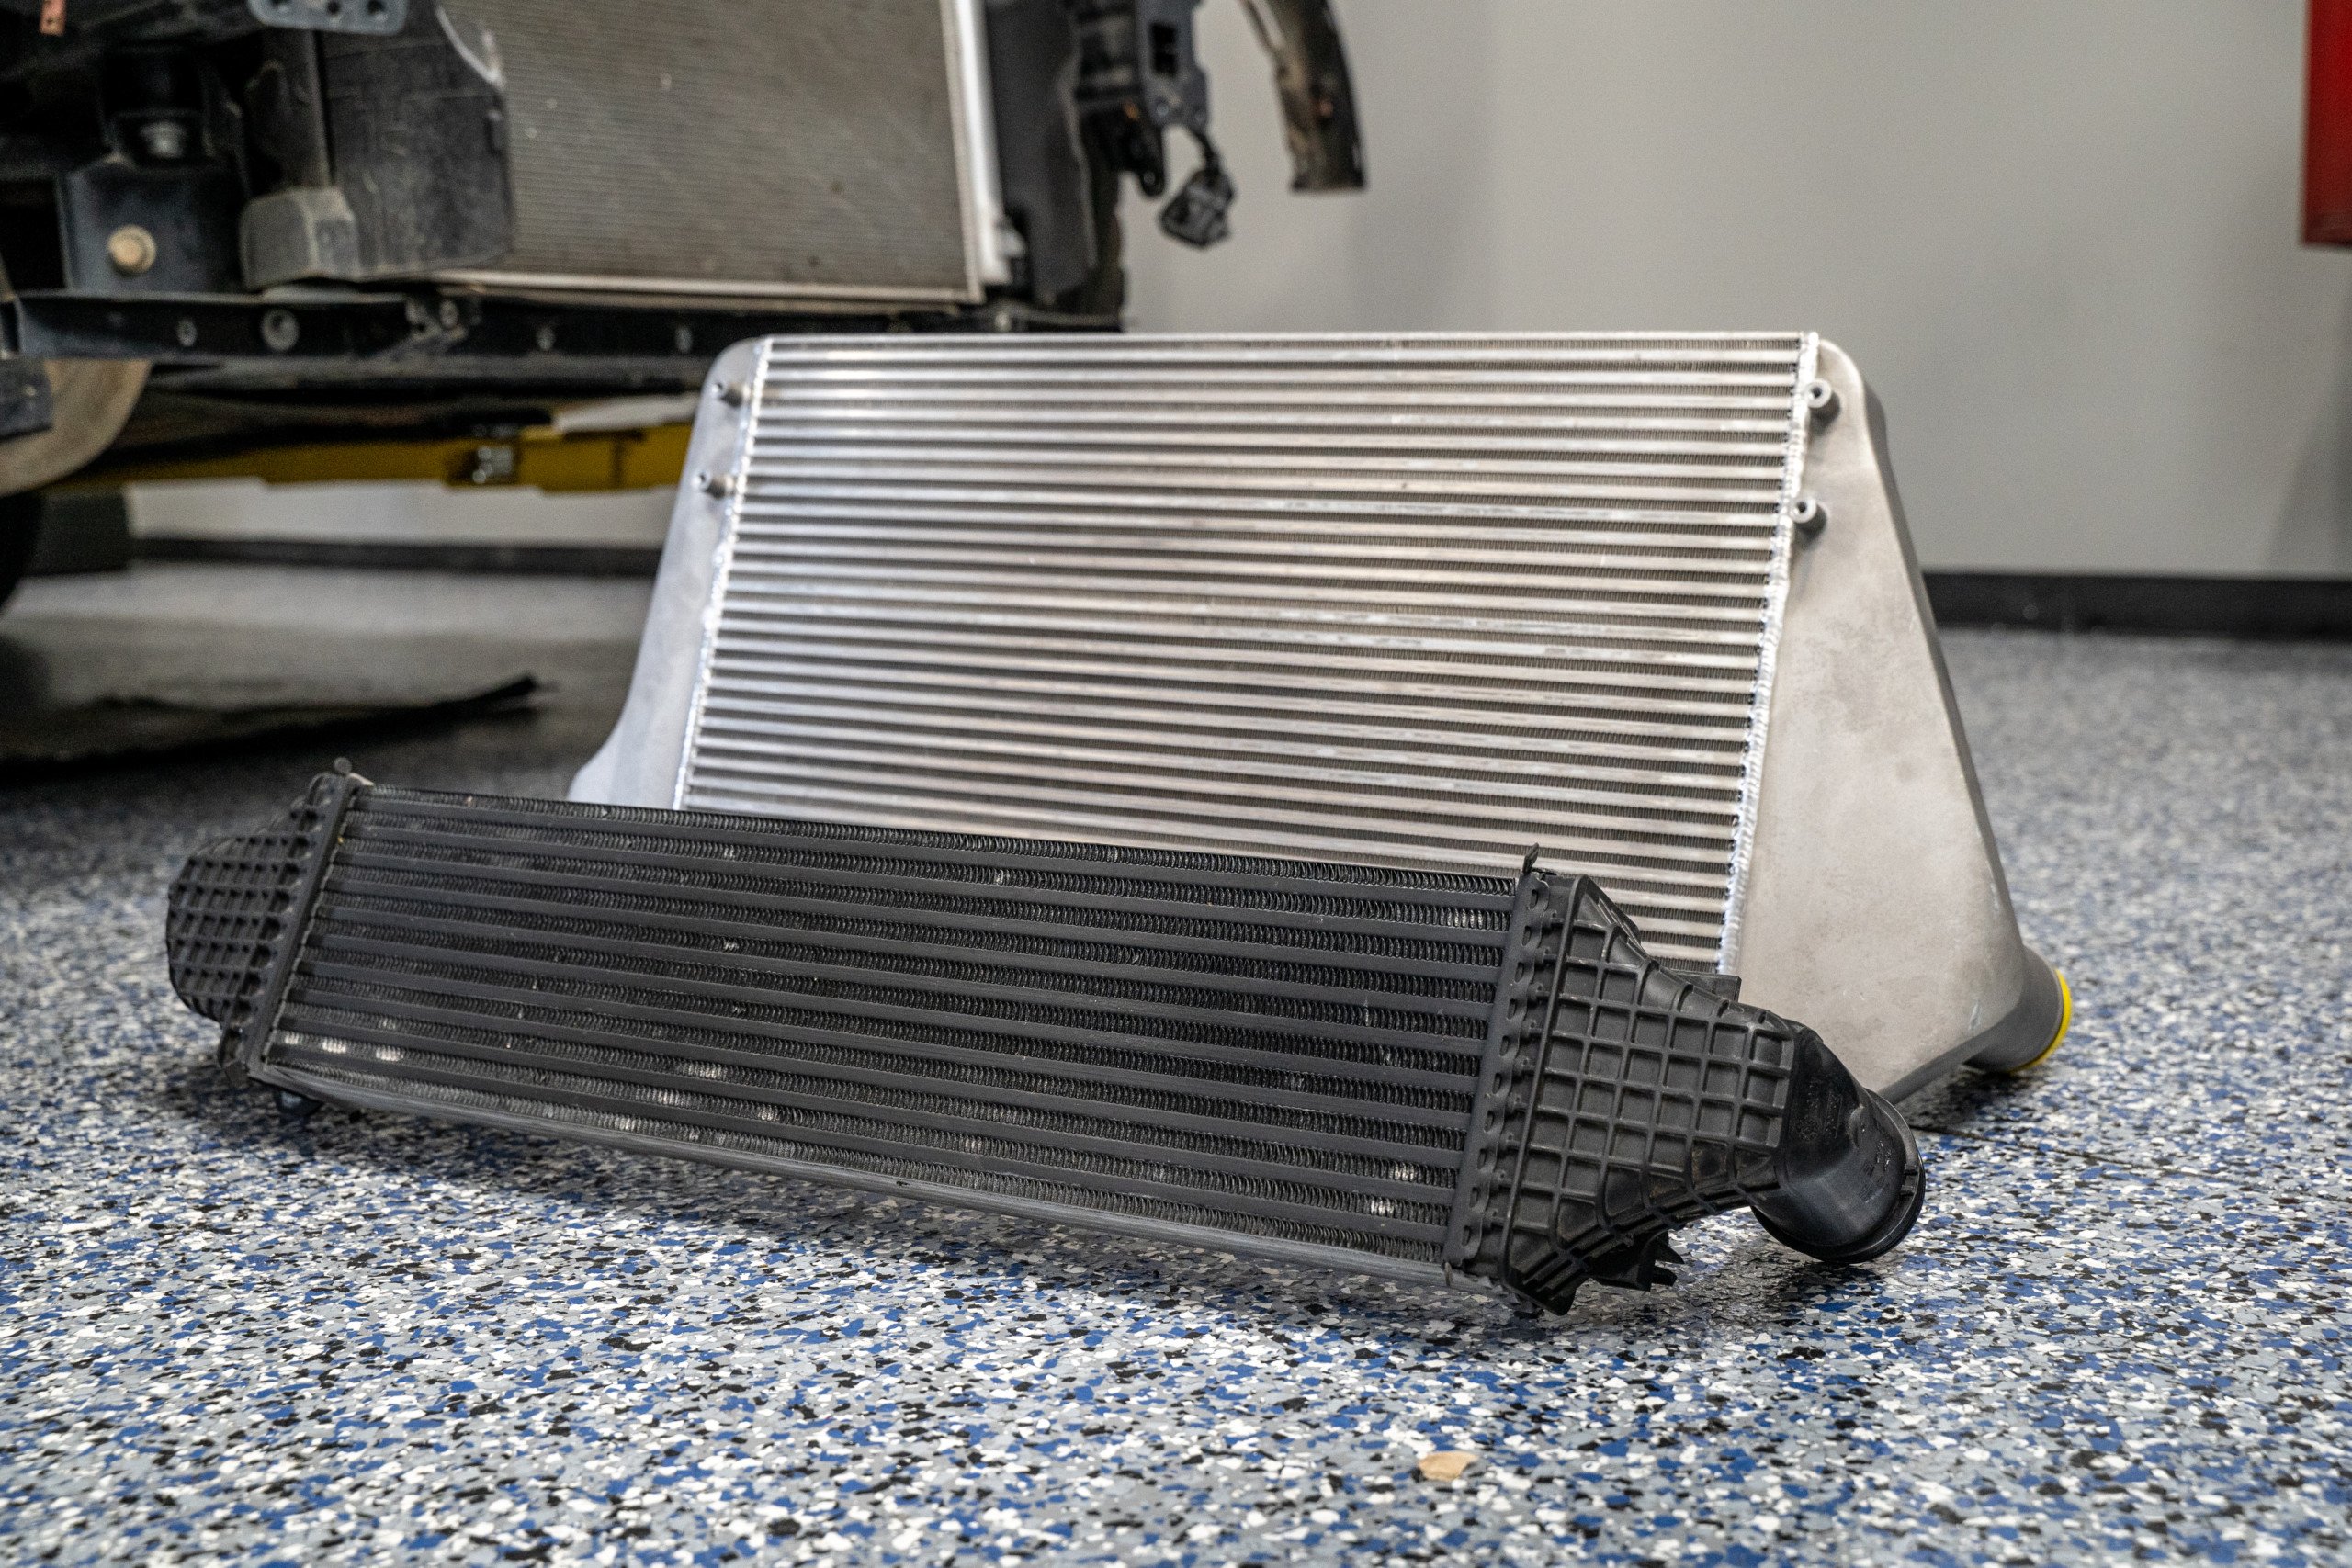 Size Matters: Solving The Micro-Sized EcoBoost Intercooler Dilemma